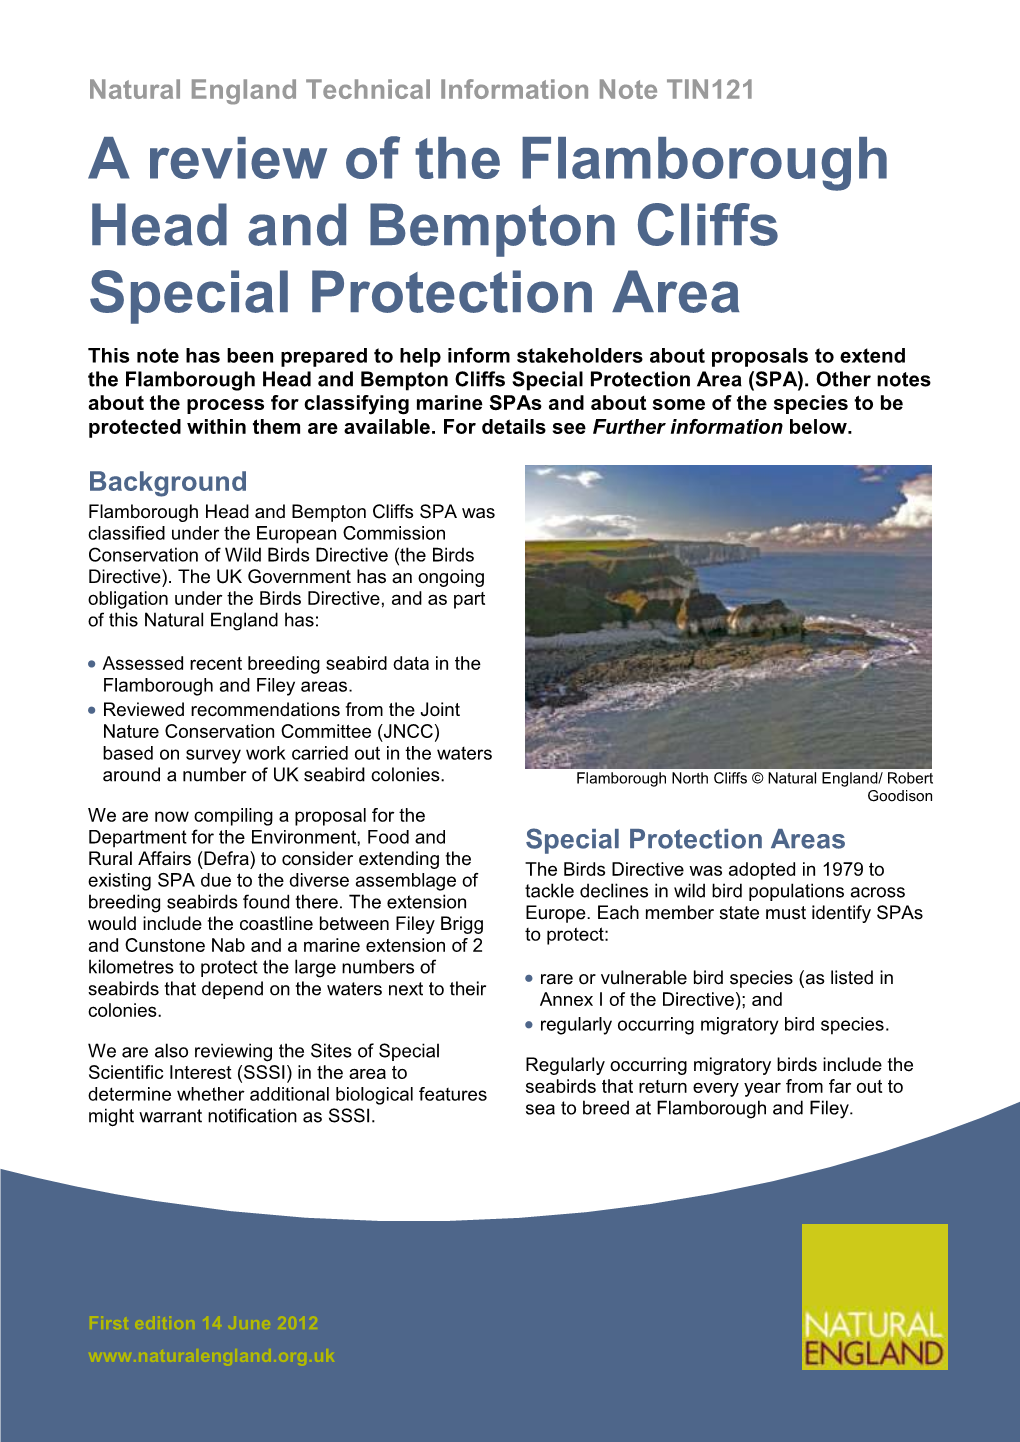 A Review of the Flamborough Head and Bempton Cliffs Special Protection Area